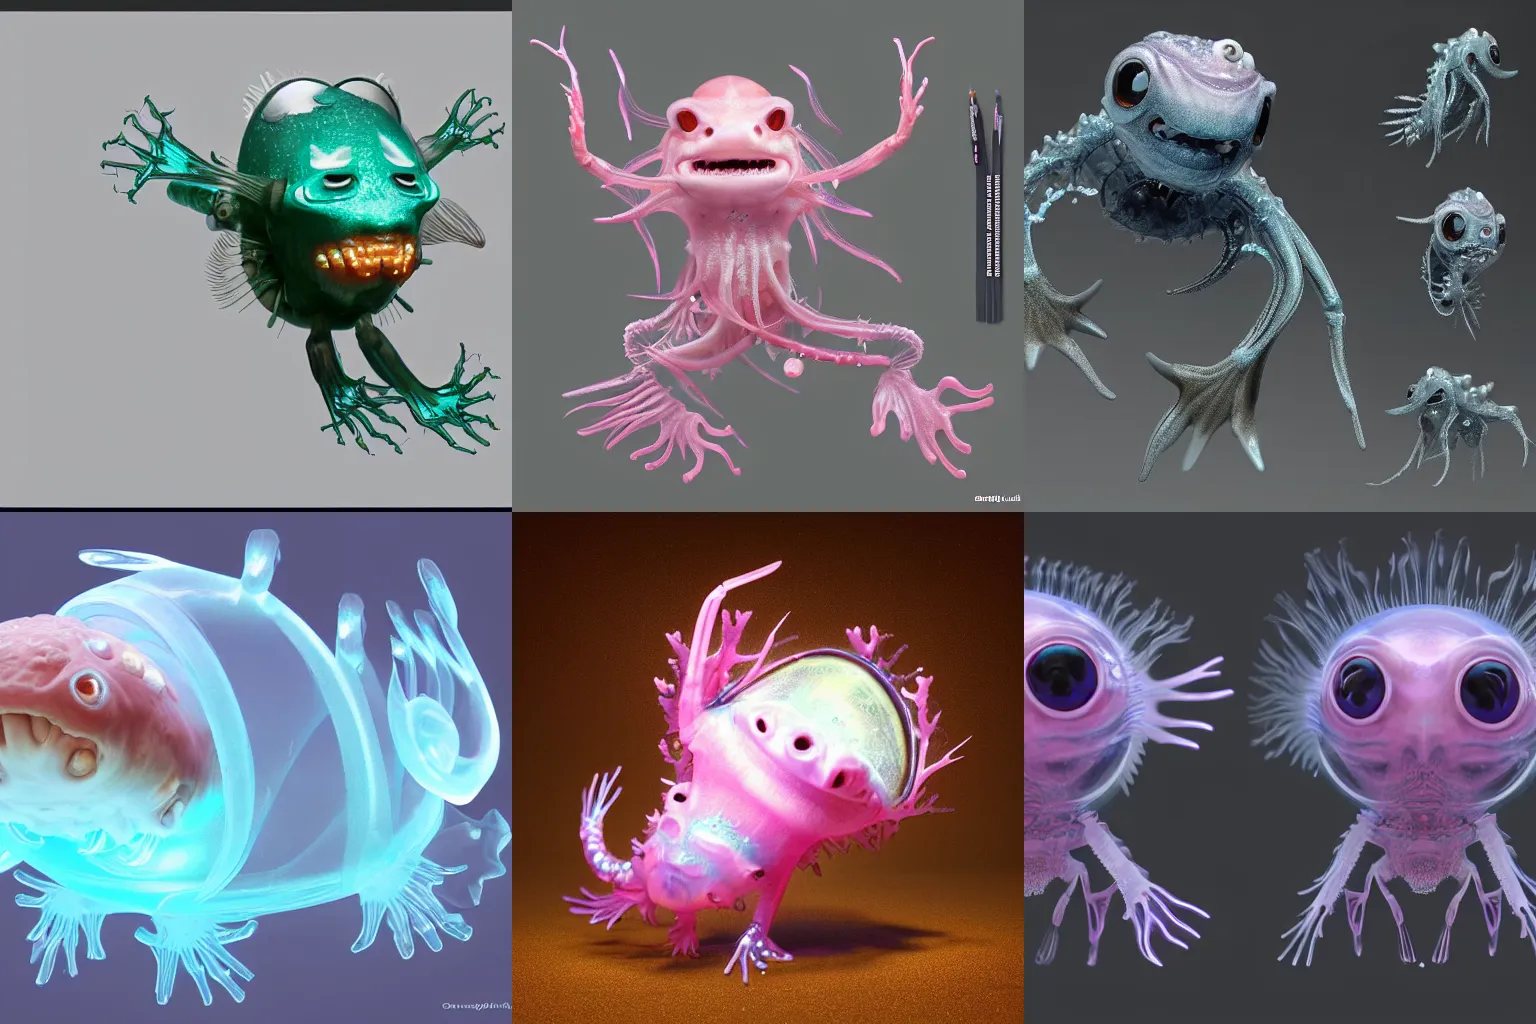 Prompt: cute! biomechanical axolotl, ghost shrimp, Barreleye fish, translucent SSS xray, Barreleye, rimlight, jelly fish dancing, fighting, bioluminescent screaming pictoplasma characterdesign toydesign toy monster creature, zbrush, octane, hardsurface modelling, artstation, cg society, by greg rutkowksi, by Eddie Mendoza, by Peter mohrbacher, by tooth wu